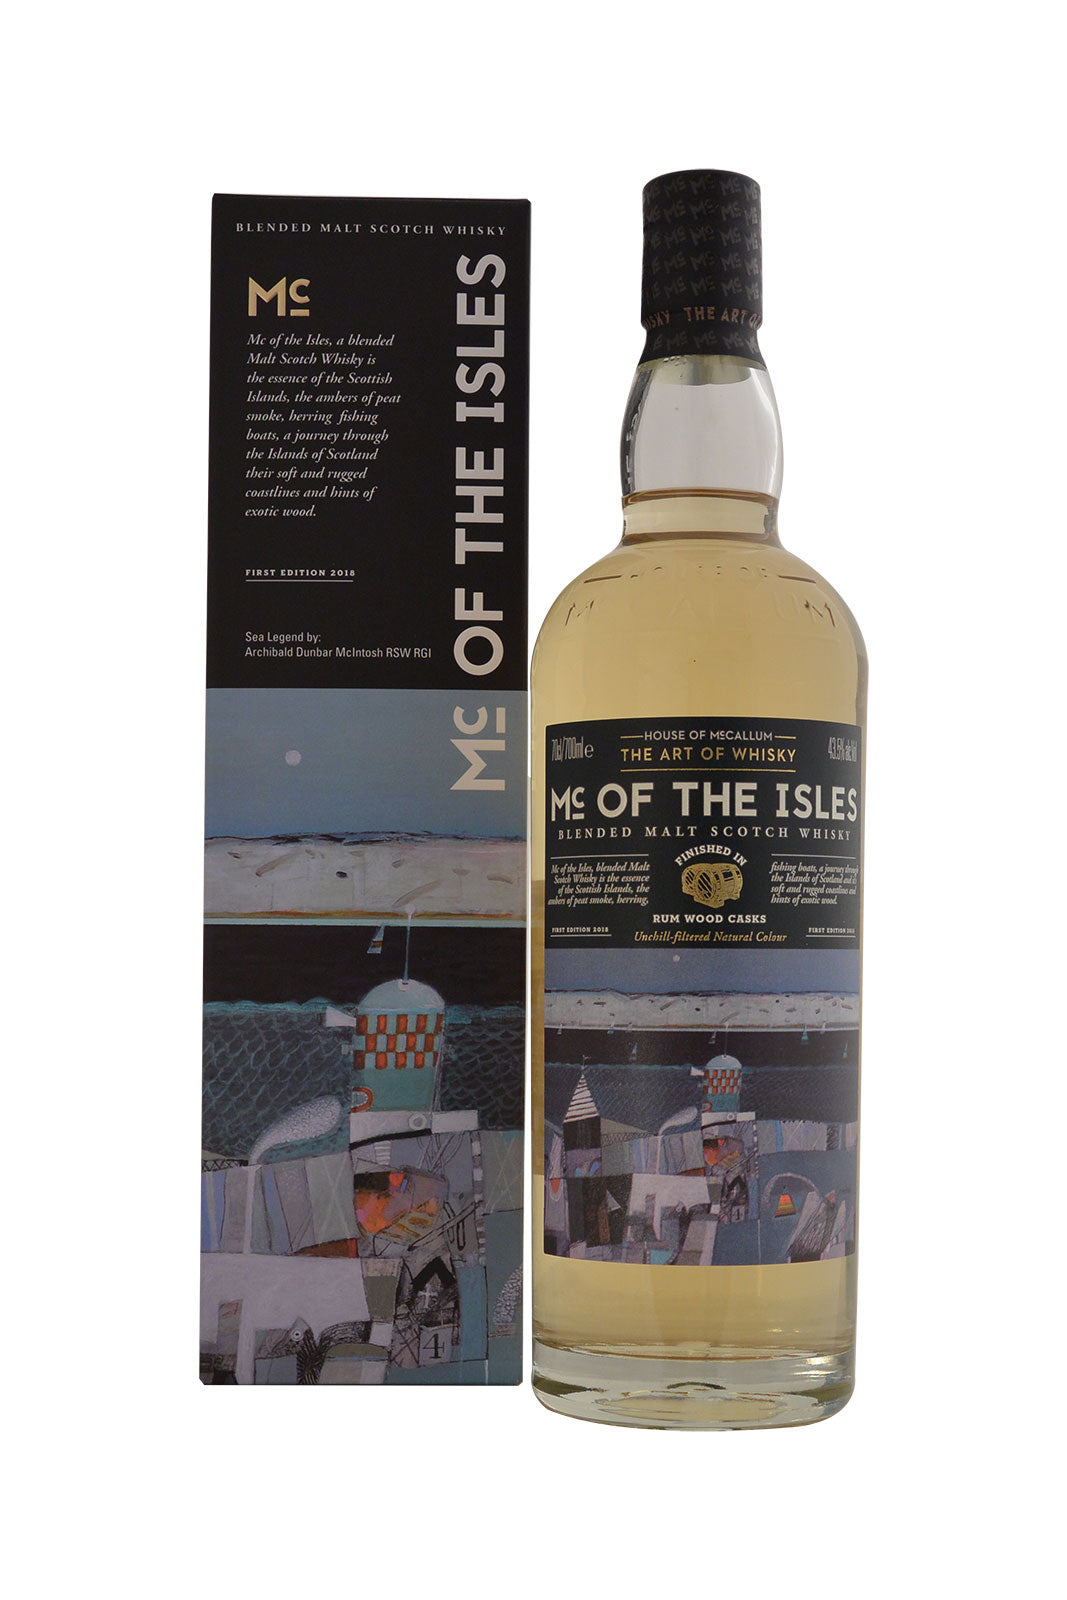 The Art of Whisky Mc of the Isles Rum Wood Cask House of McCallum